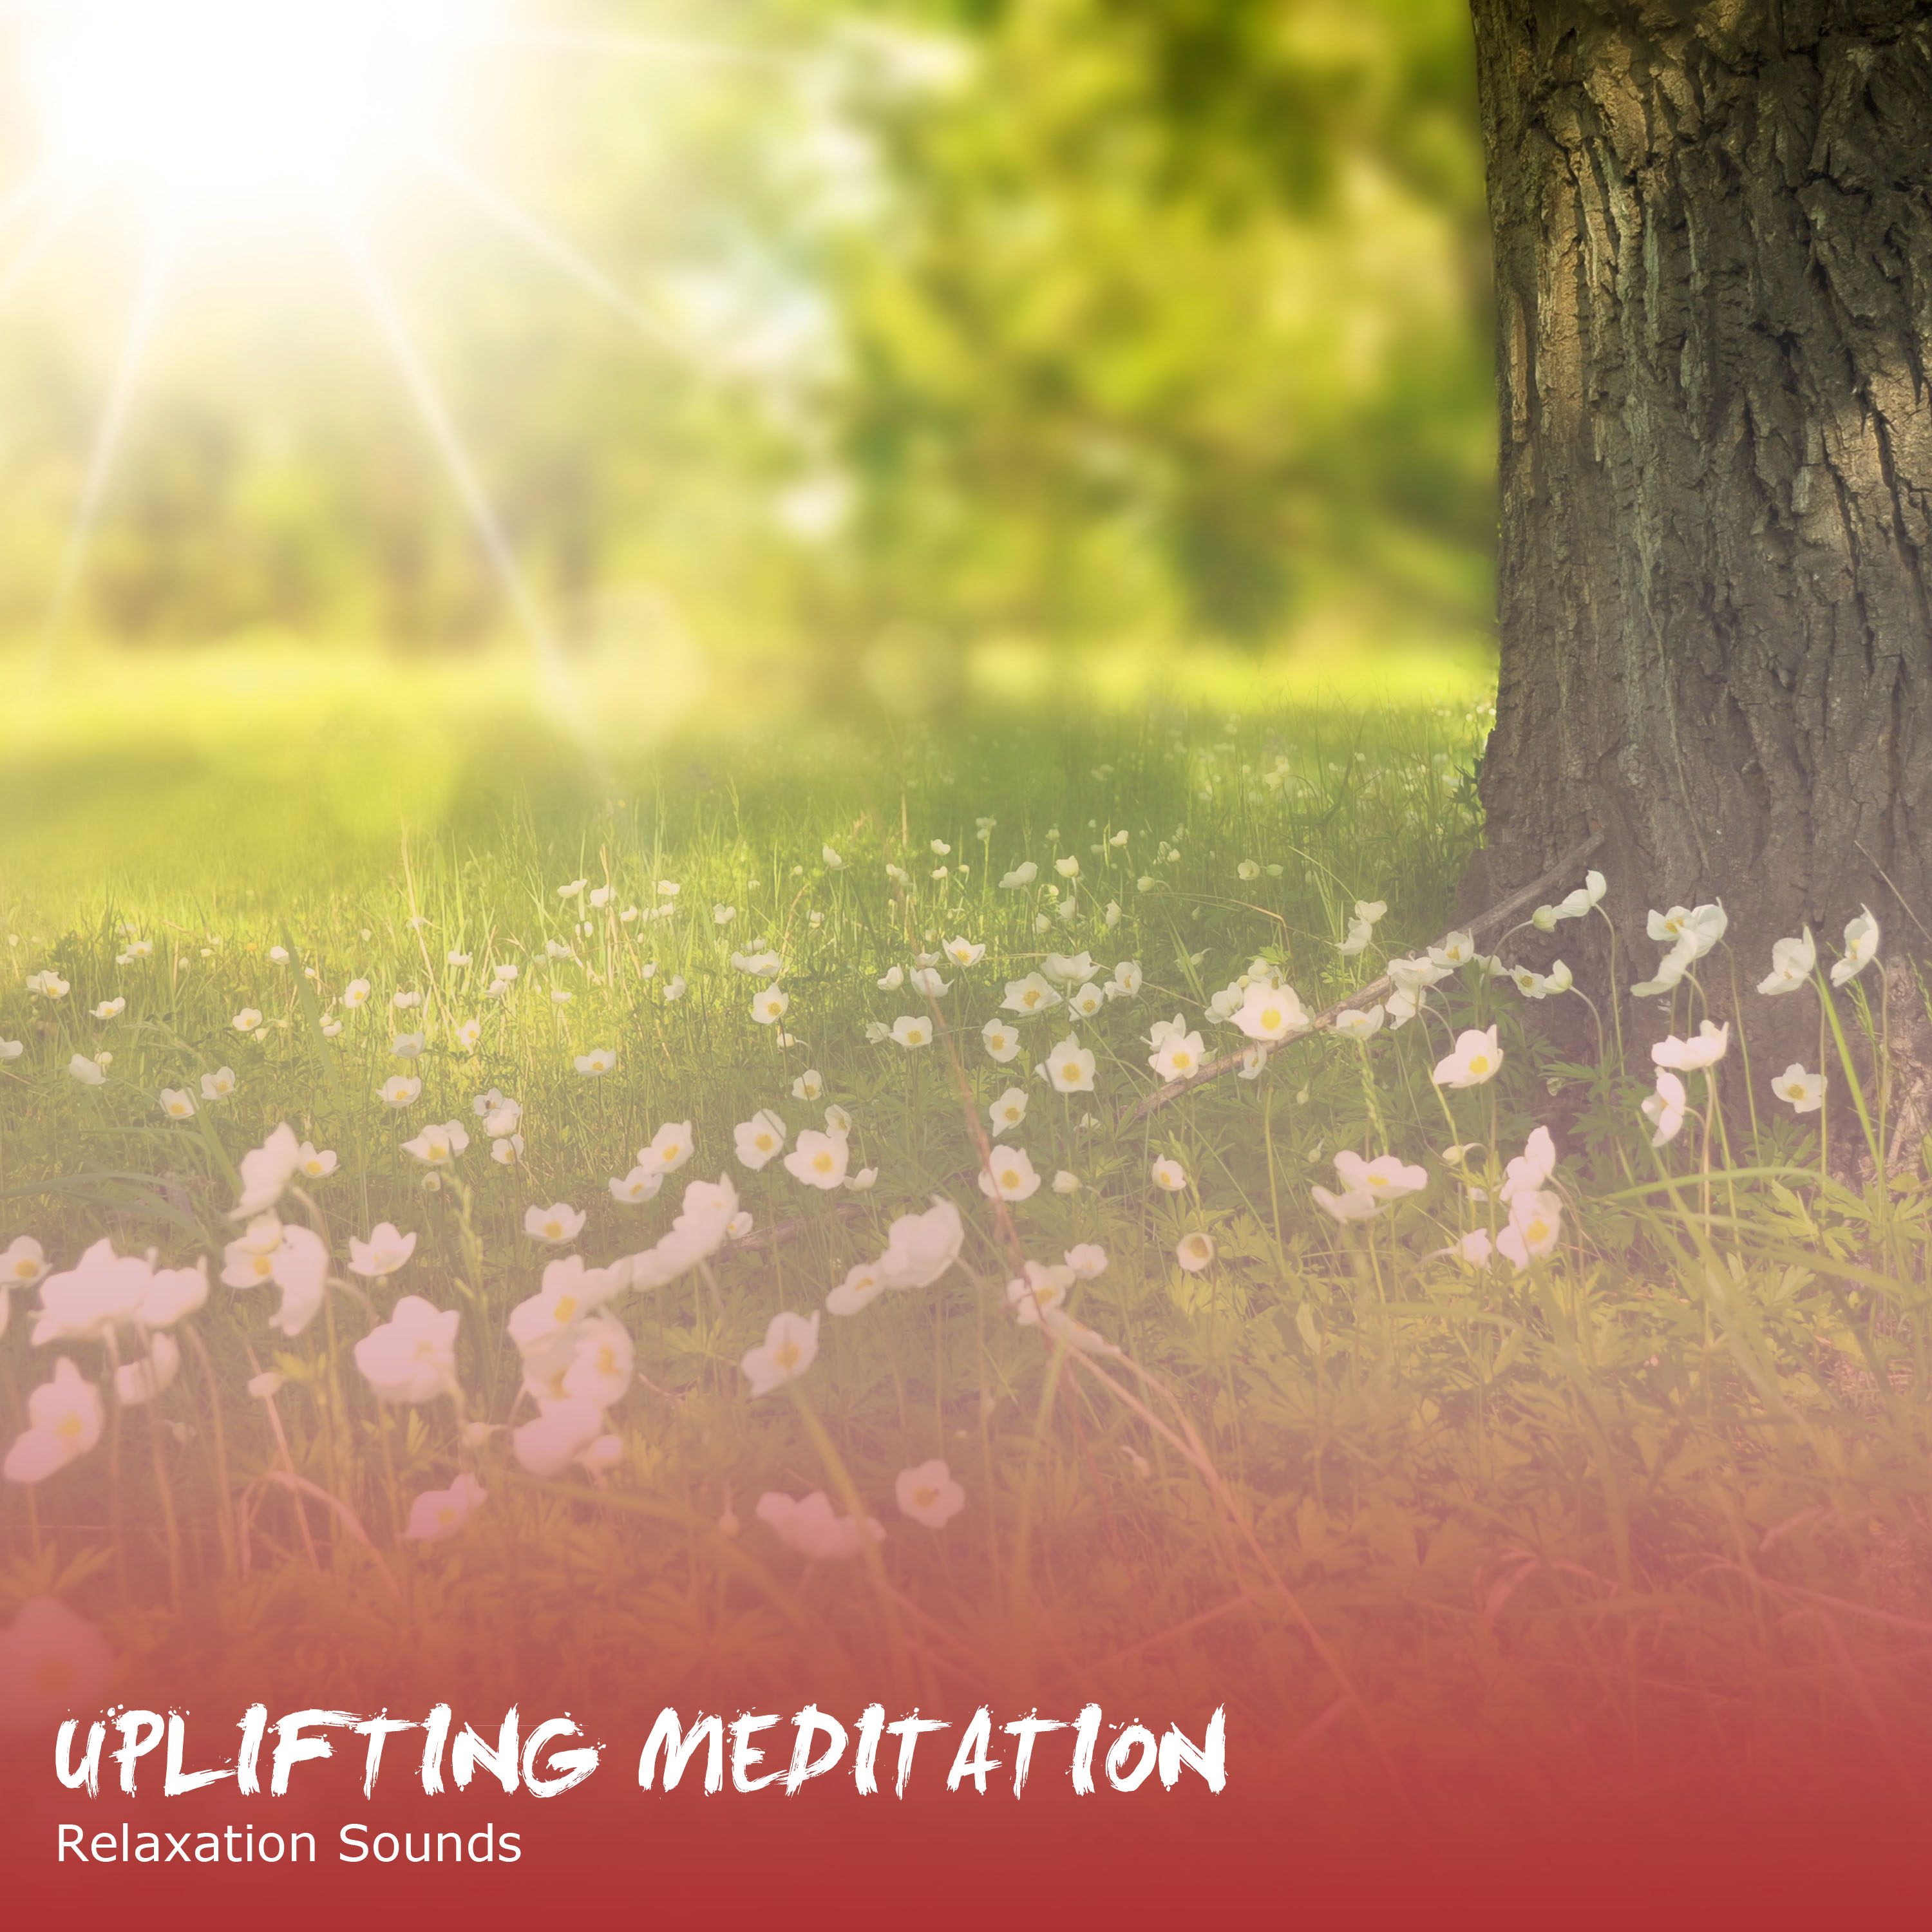 20 Uplifting Meditation and Relaxation Sounds